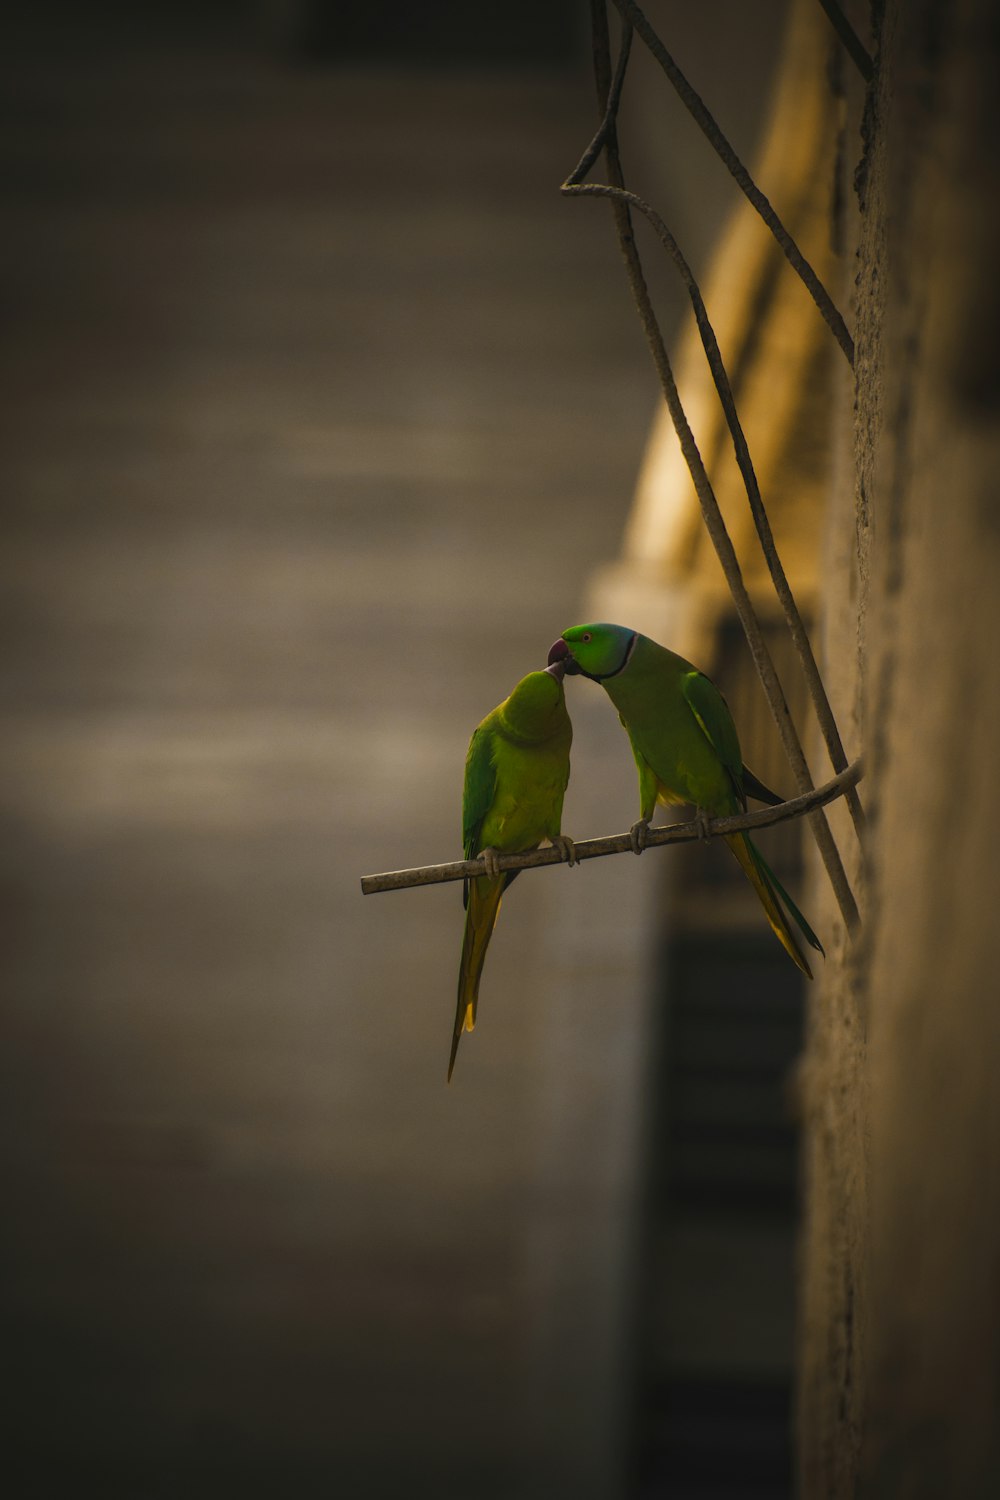 two rose-ringed parakeets perched on metal bar